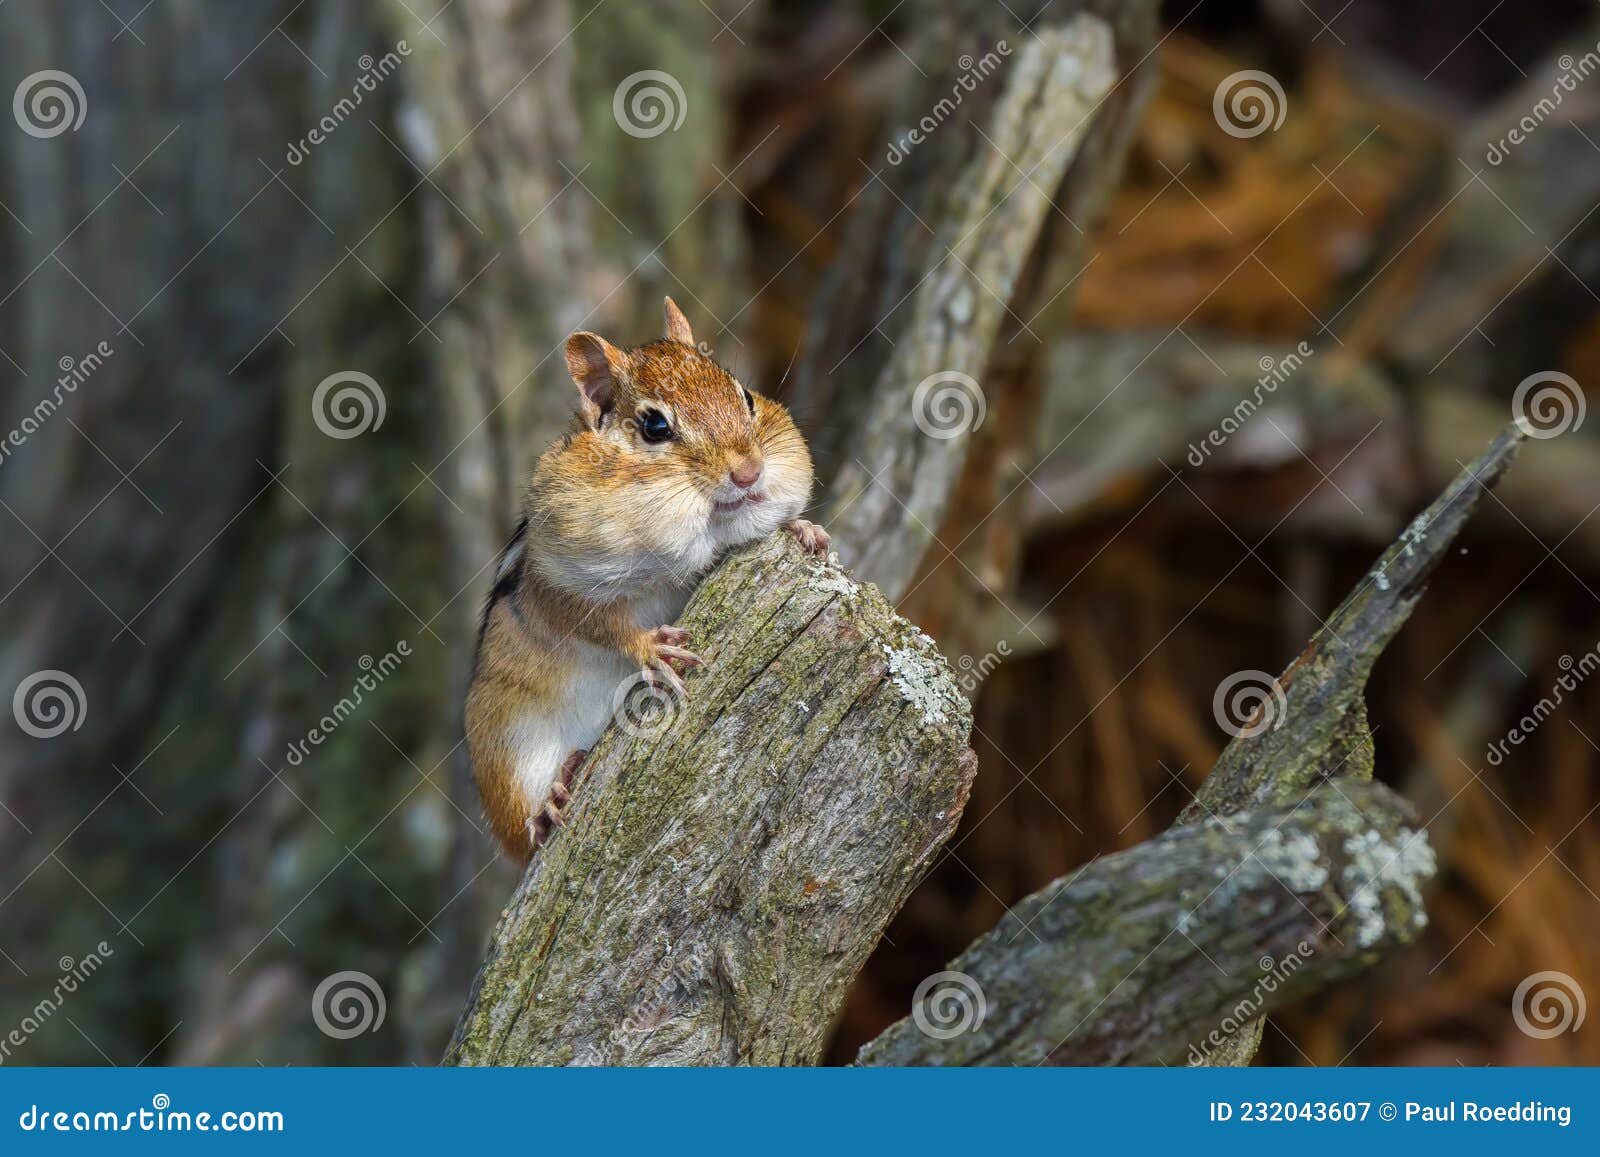 Eastern Chipmunk with Its Cheeks Full of Food Stock Image - Image of ...